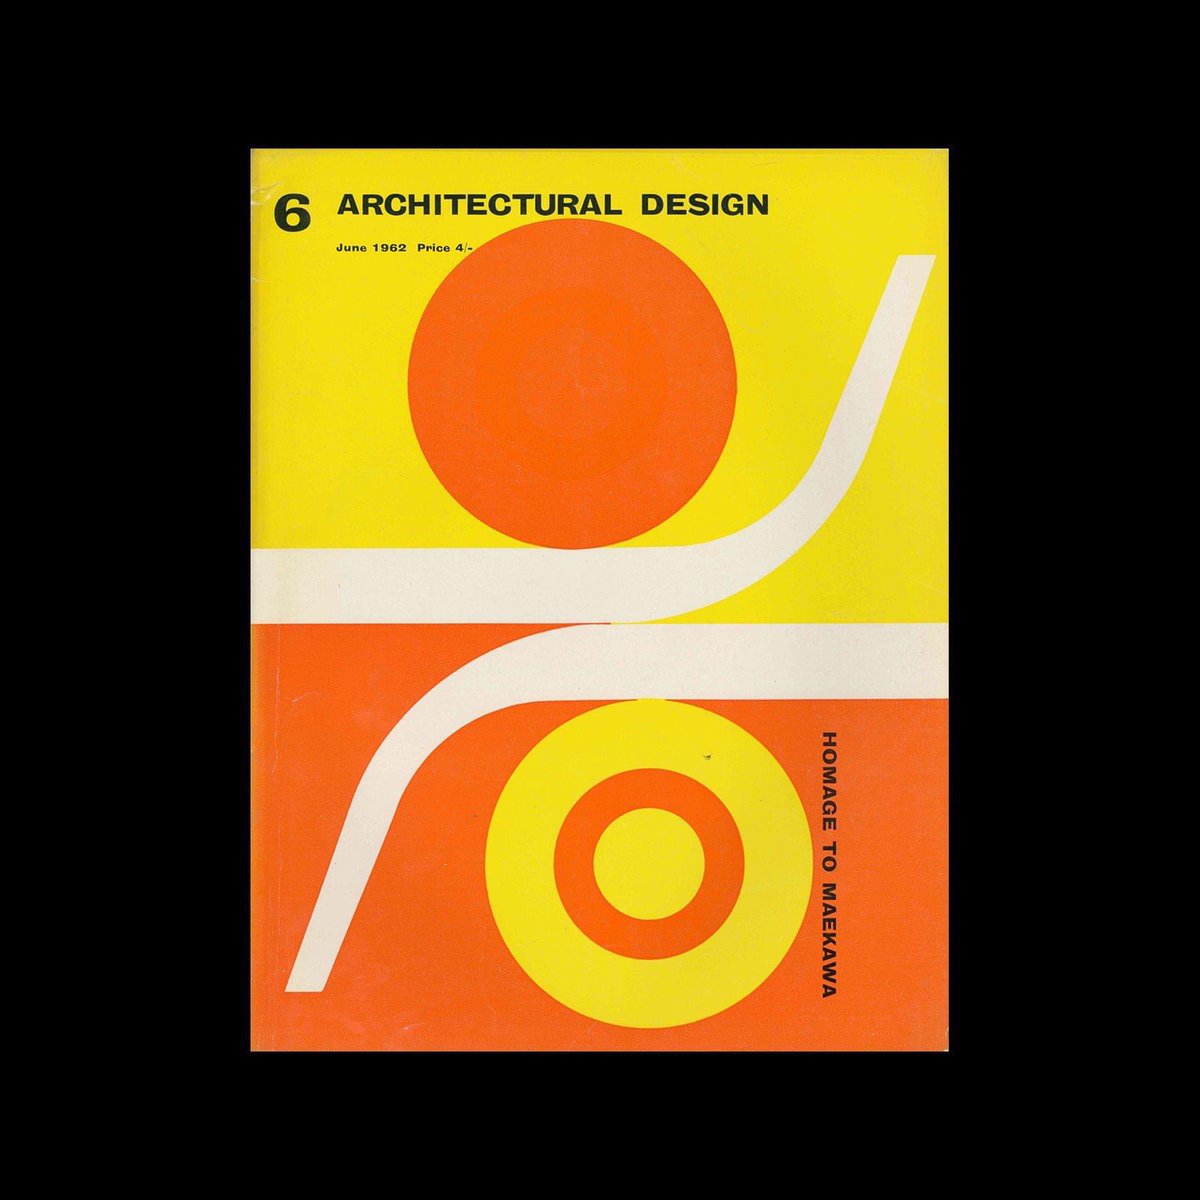 DesignReviewed: RT @DesignReviewed: Architectural Design, June 1962. Cover design by Theo Crosby #theocrosby
designreviewed.com/artefacts/arch… #graphicdesign